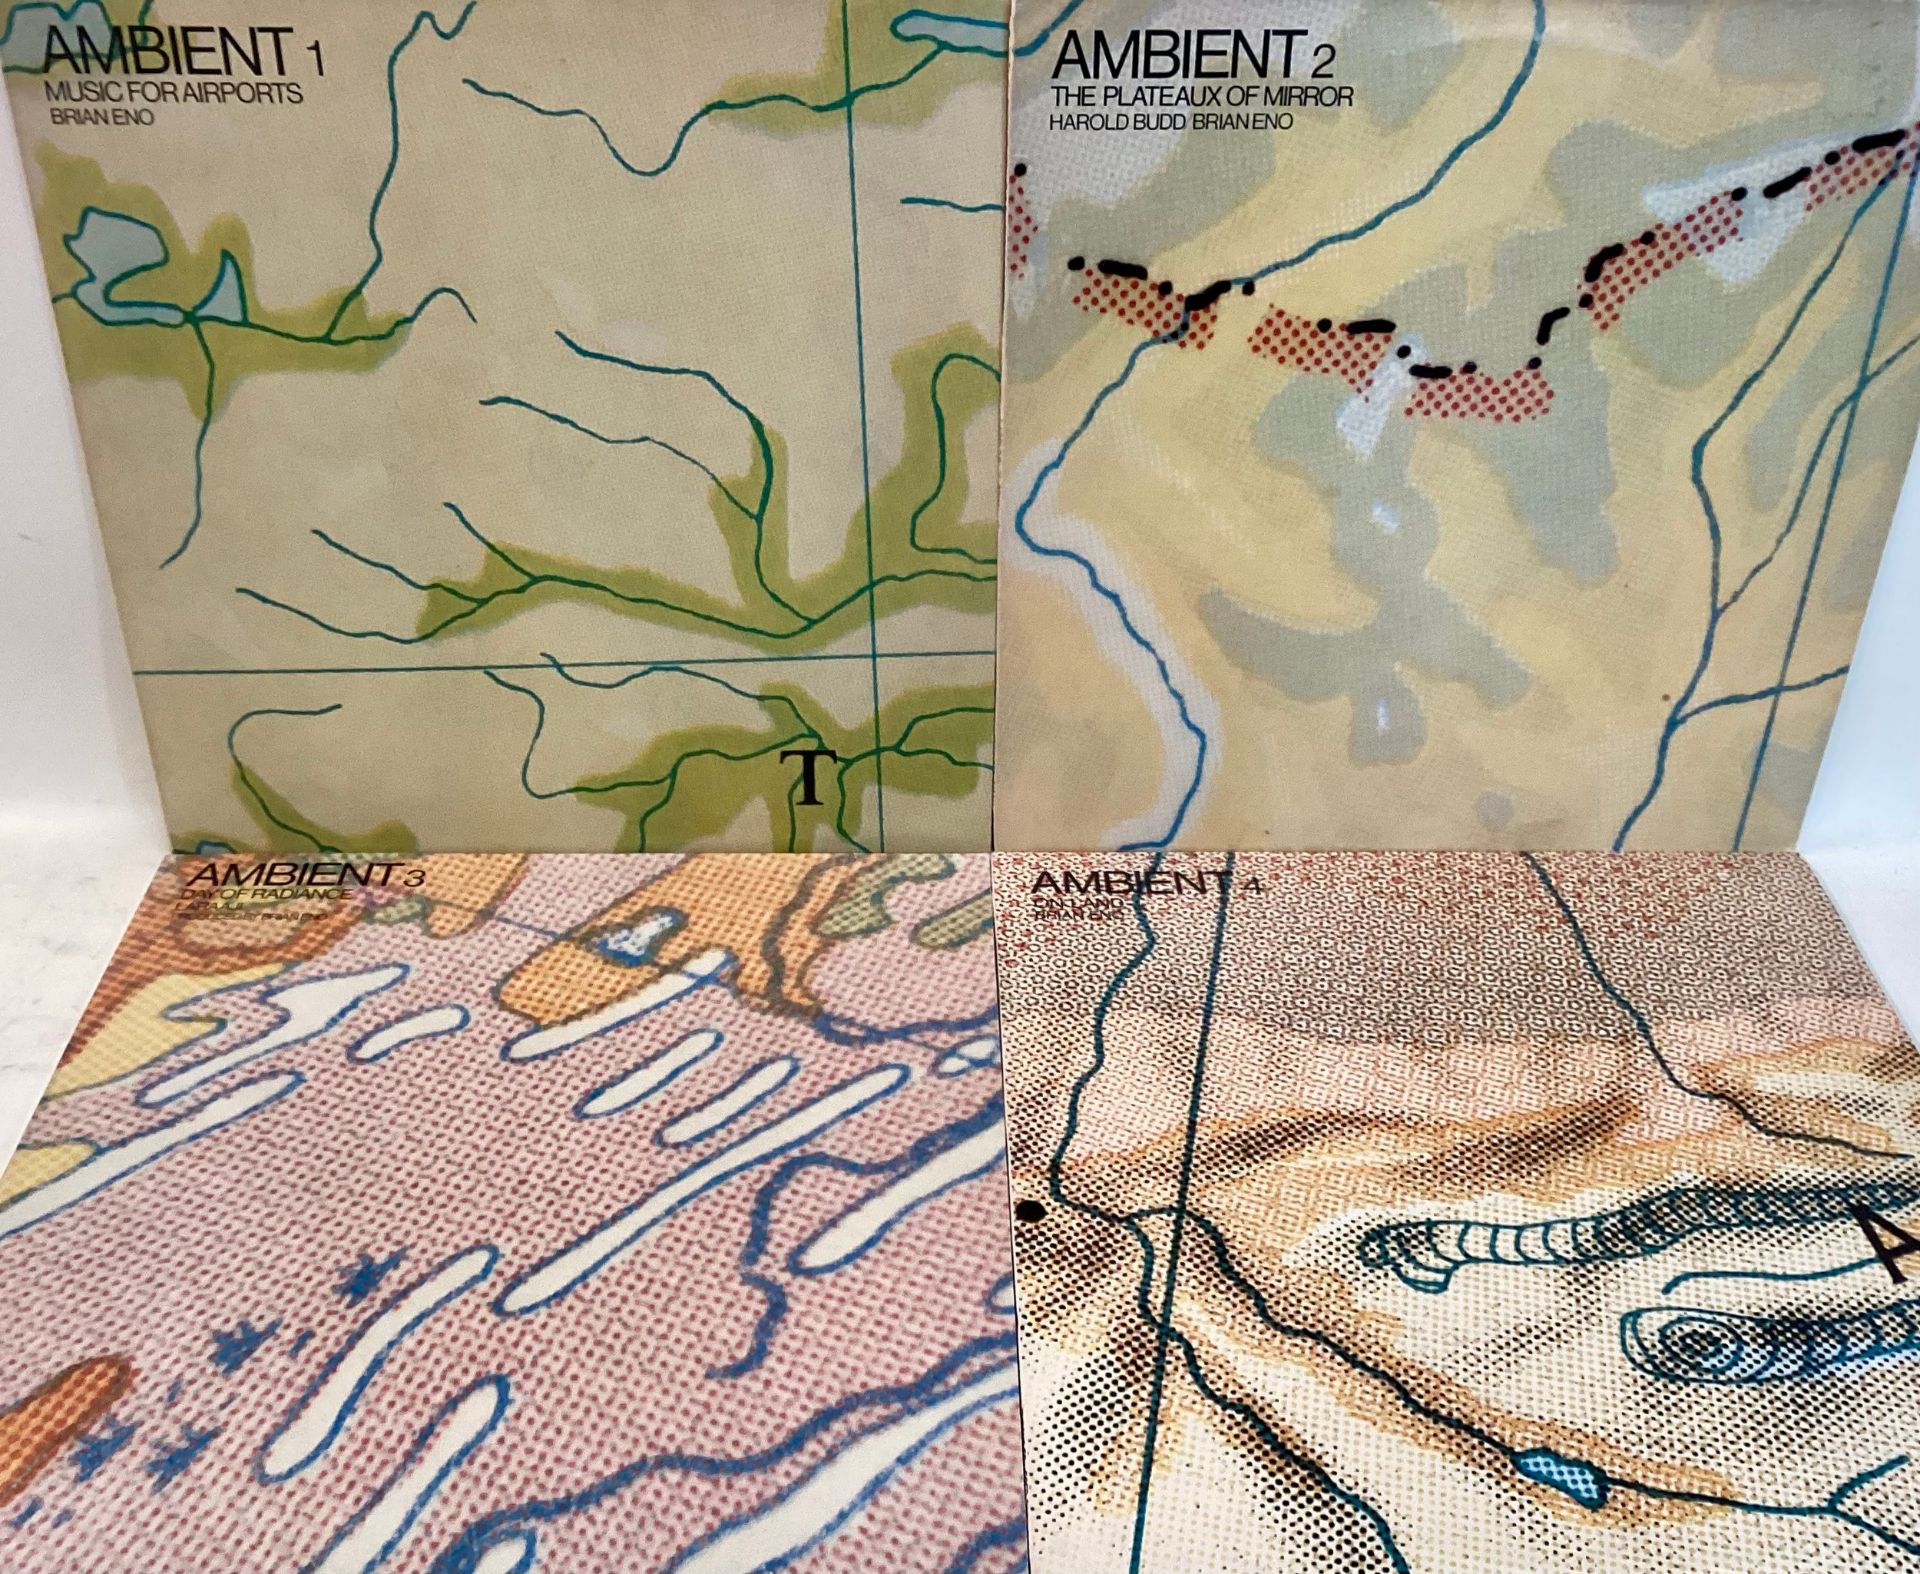 BRIAN ENO VINYL ‘AMBIENT’ ALBUMS X 4. Four albums here entitled - Music For Airports - The